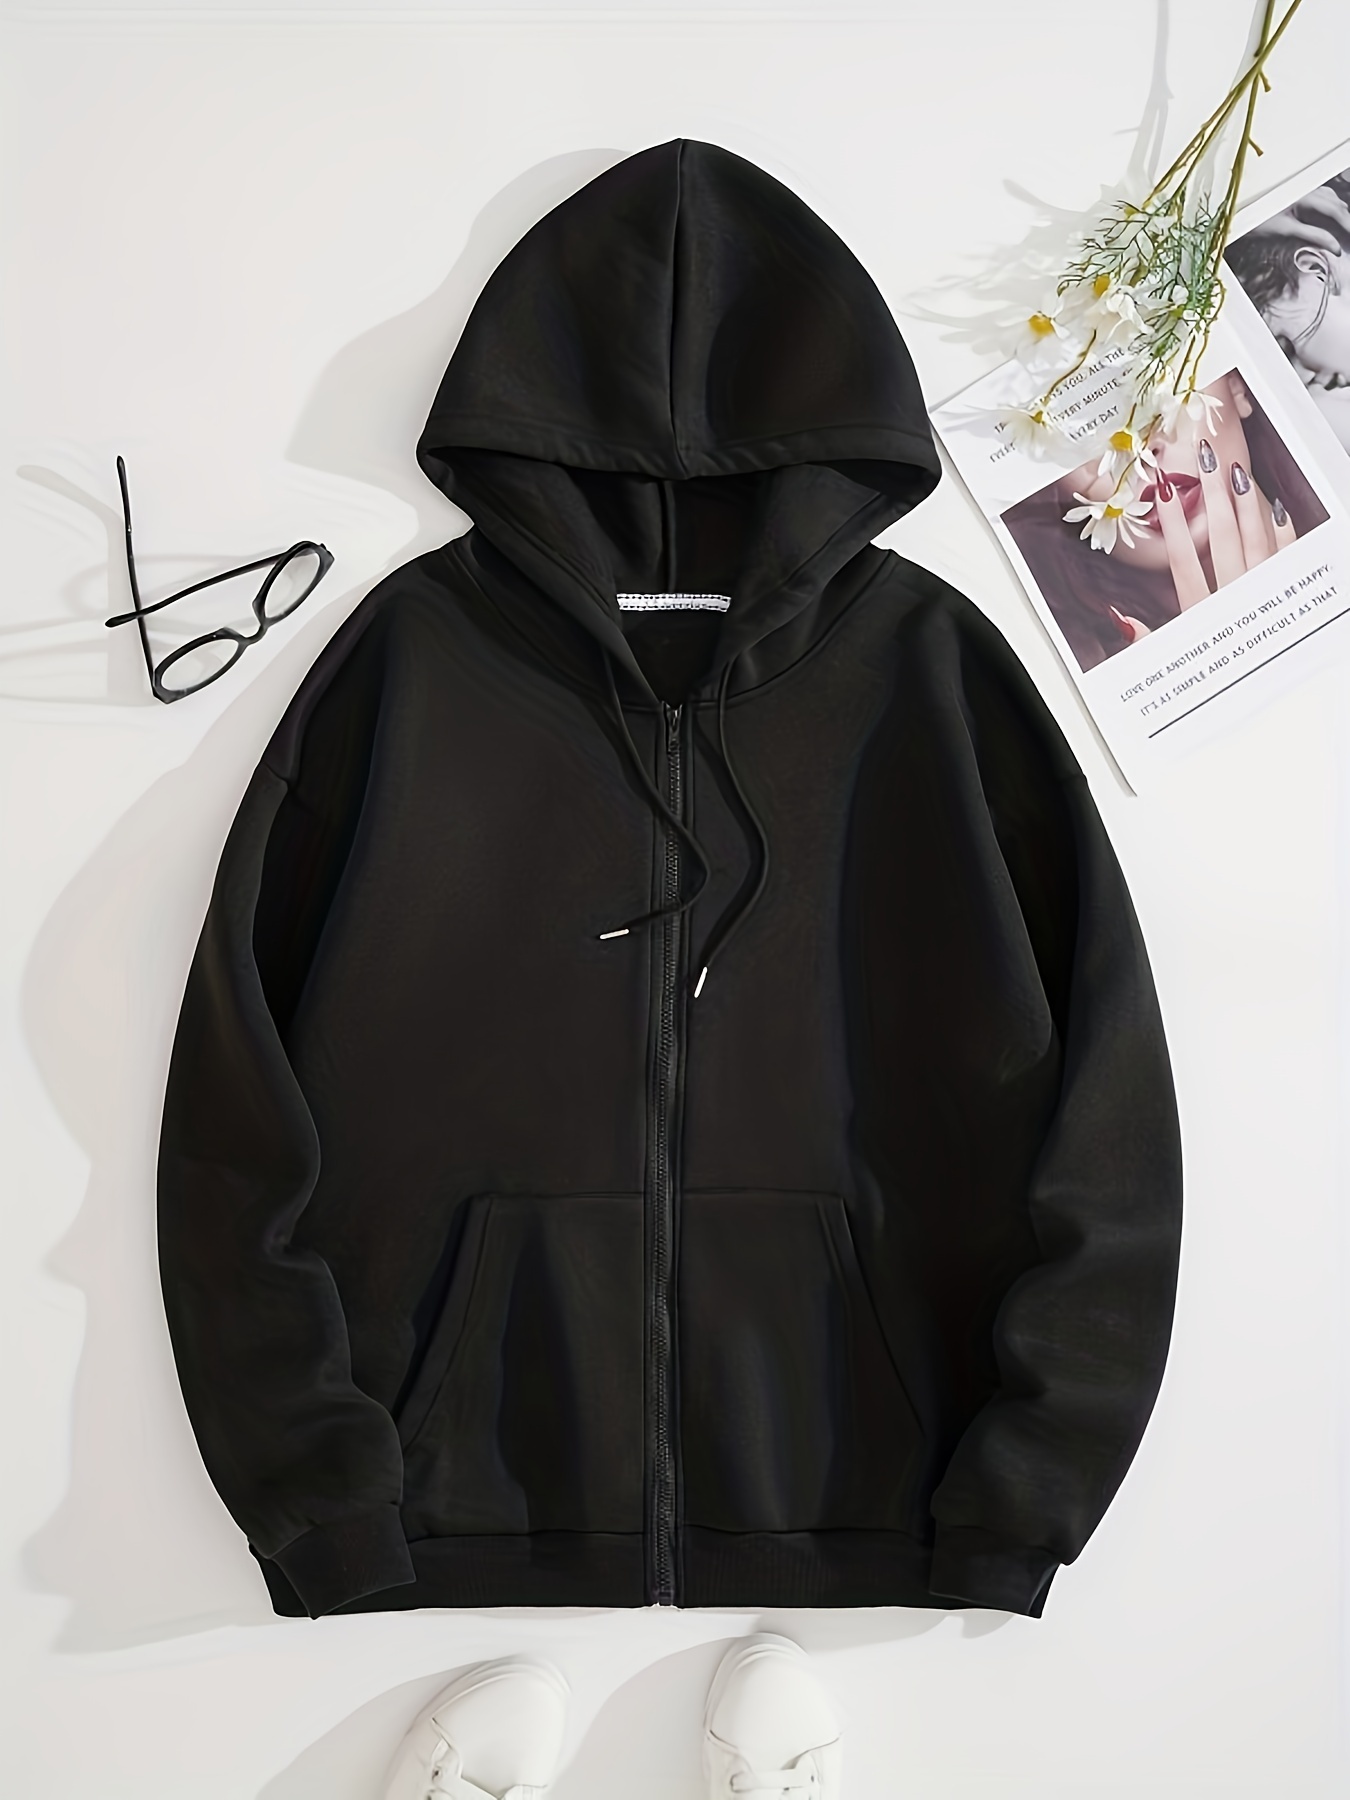  Womens Hoodie Pullover Casual Plain Basic Sweatshirt with Hood  Solid Color Oversized Long Sleeve Hoodies Black : Sports & Outdoors